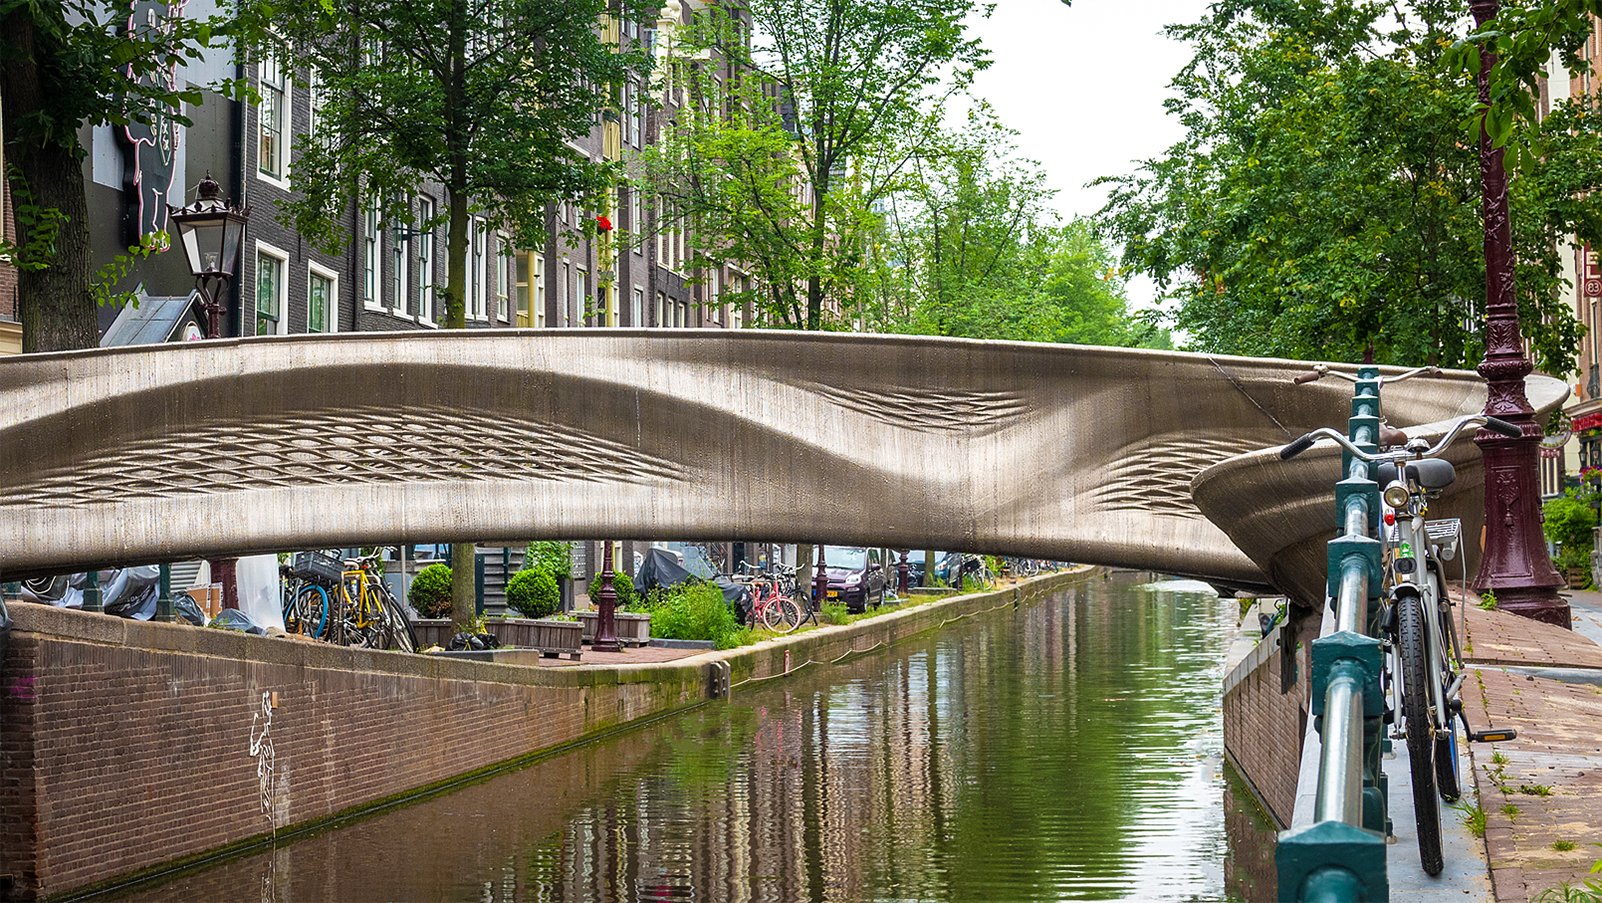 MX3D to 3D Print a Bridge in Mid-Air over Amsterdam Canal